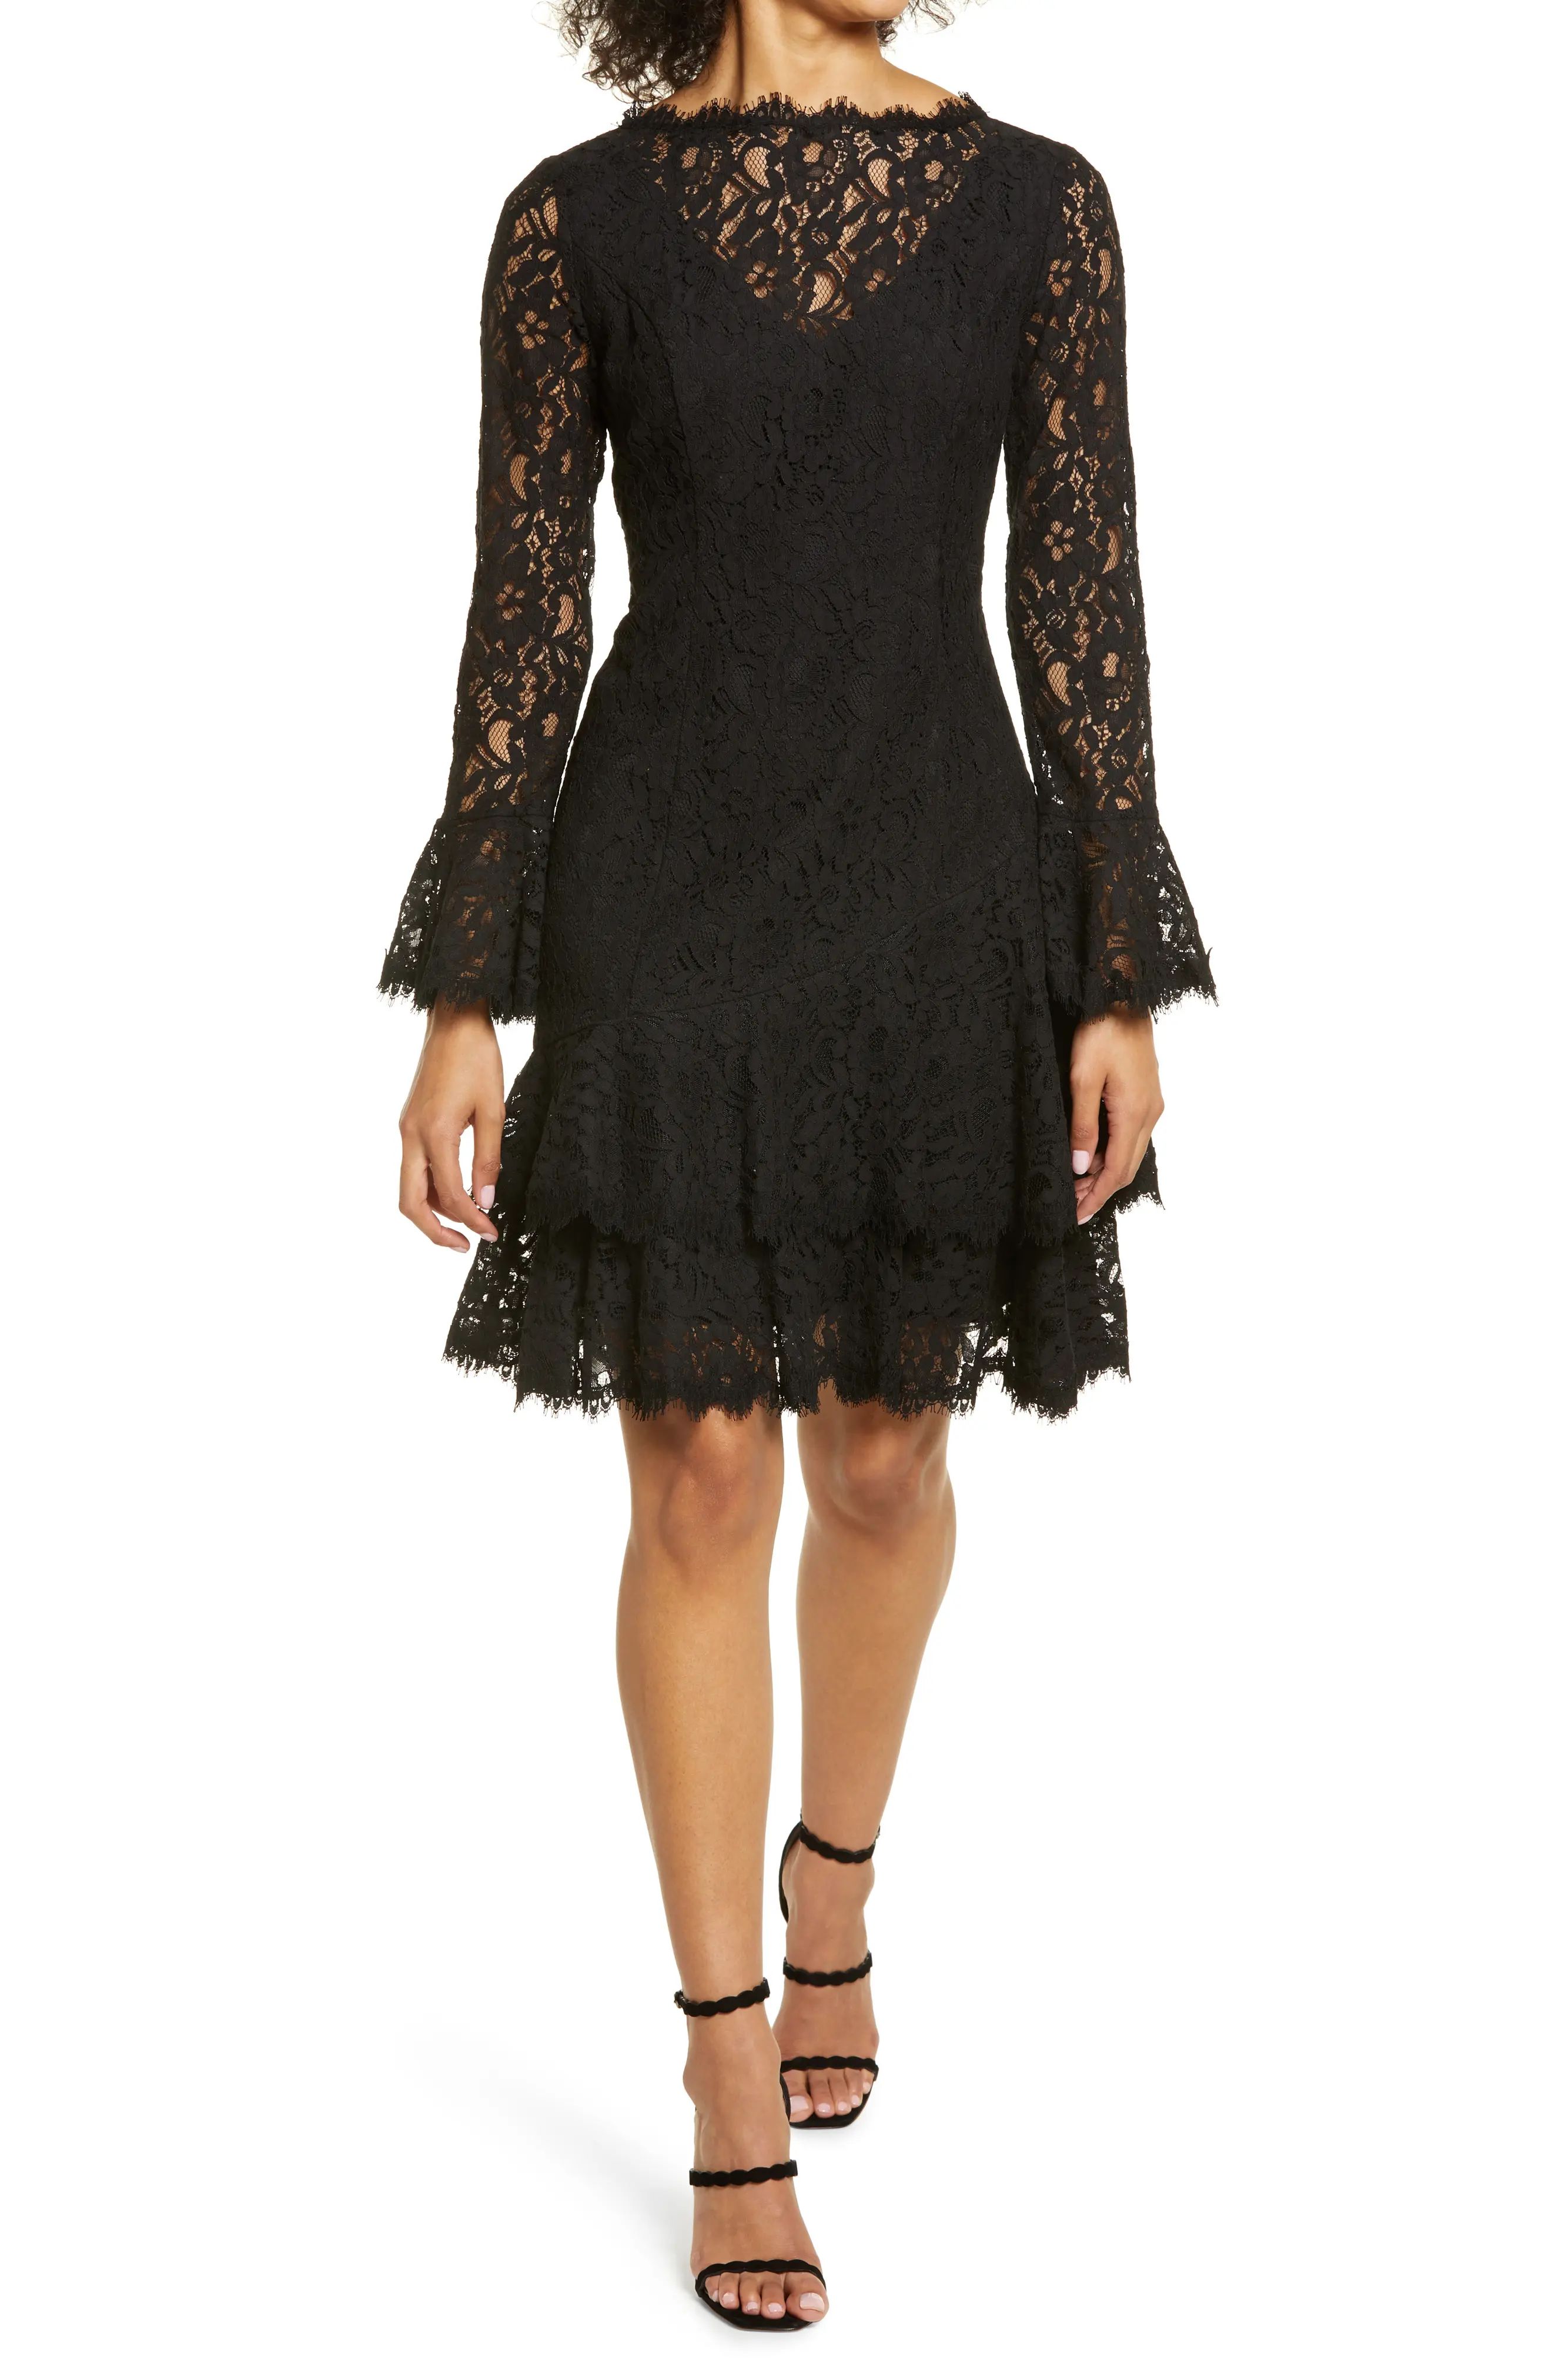 Shani Long Sleeve Tiered Lace Dress, Size 14 in Black at Nordstrom | Nordstrom